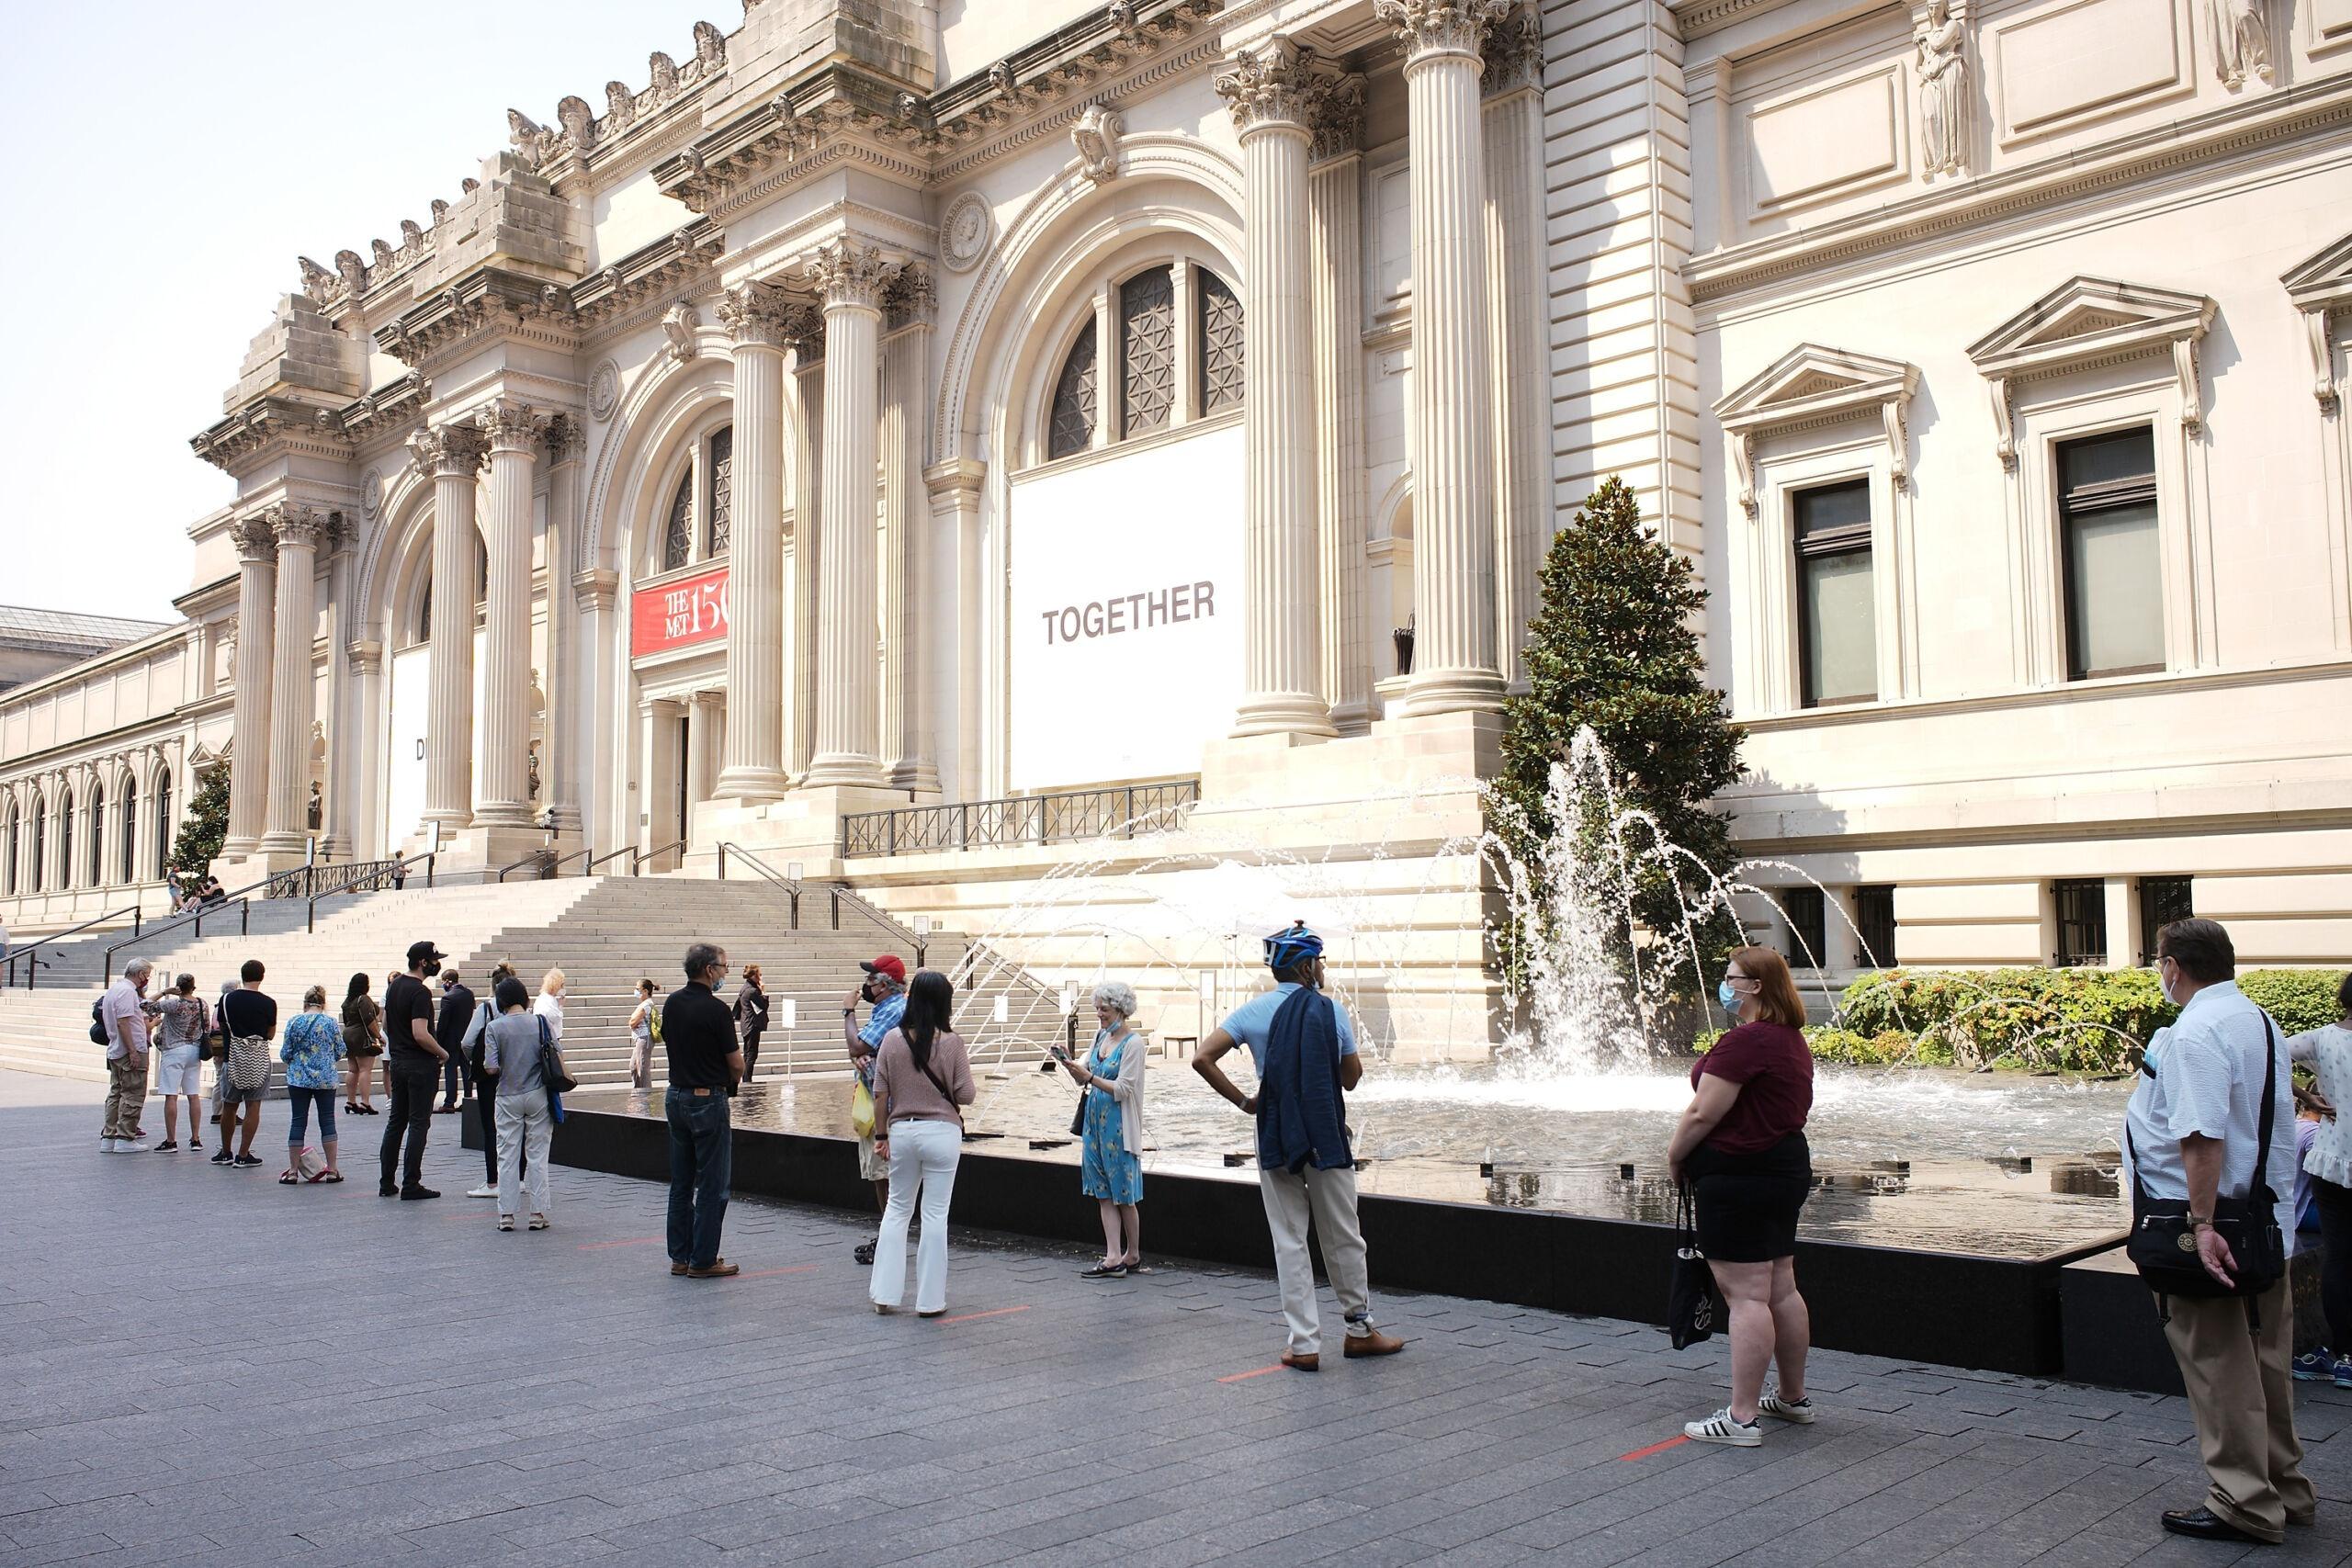 Visitors queue to enter as The Met reopens in August 2020 after Covid 19 lockdown closure. 